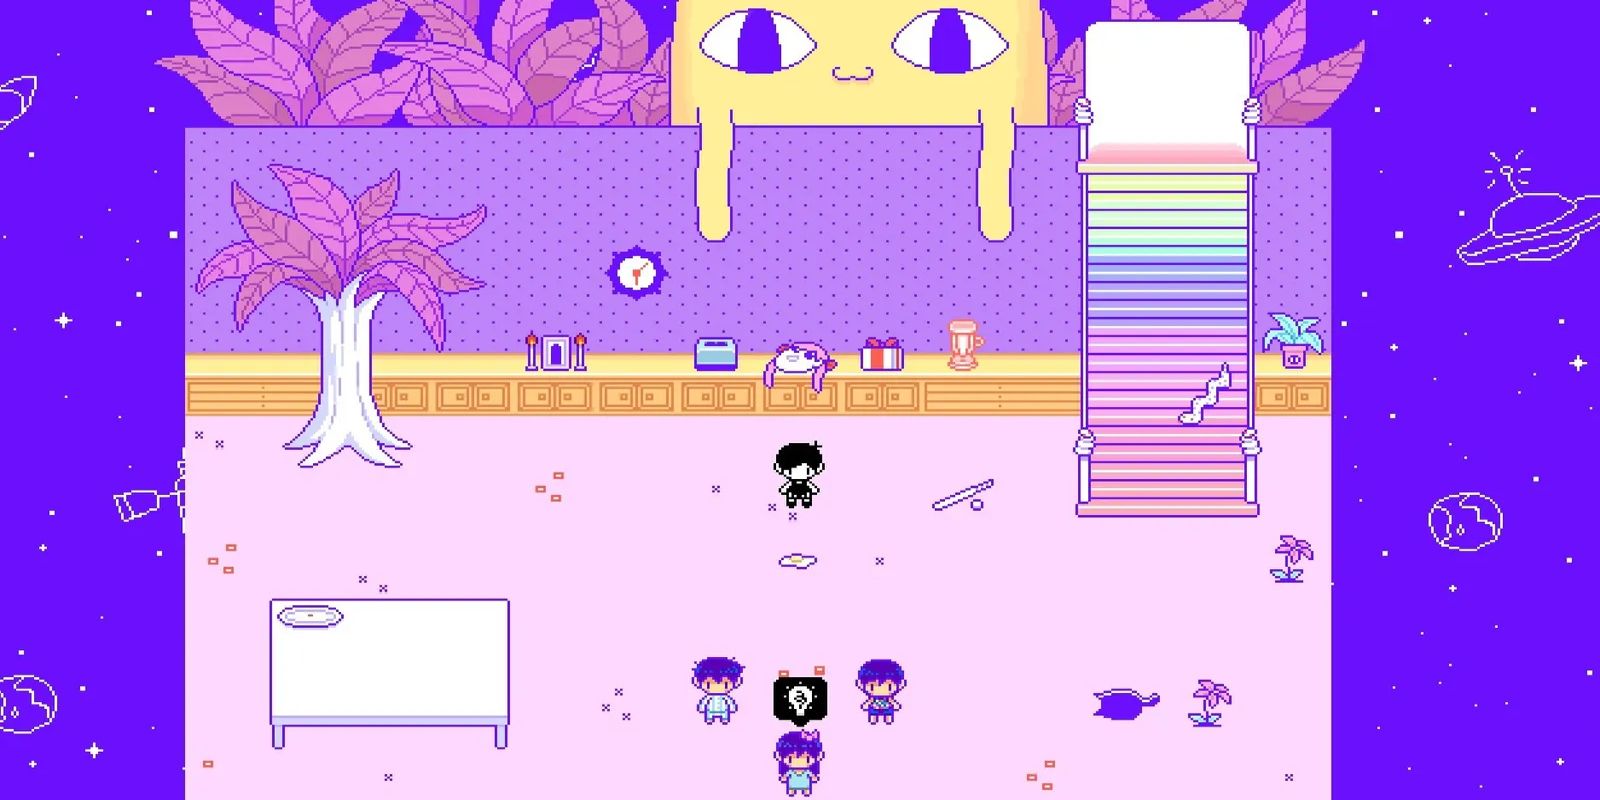 A screenshot of a giant cat looking over kids in a room in the game Omori.